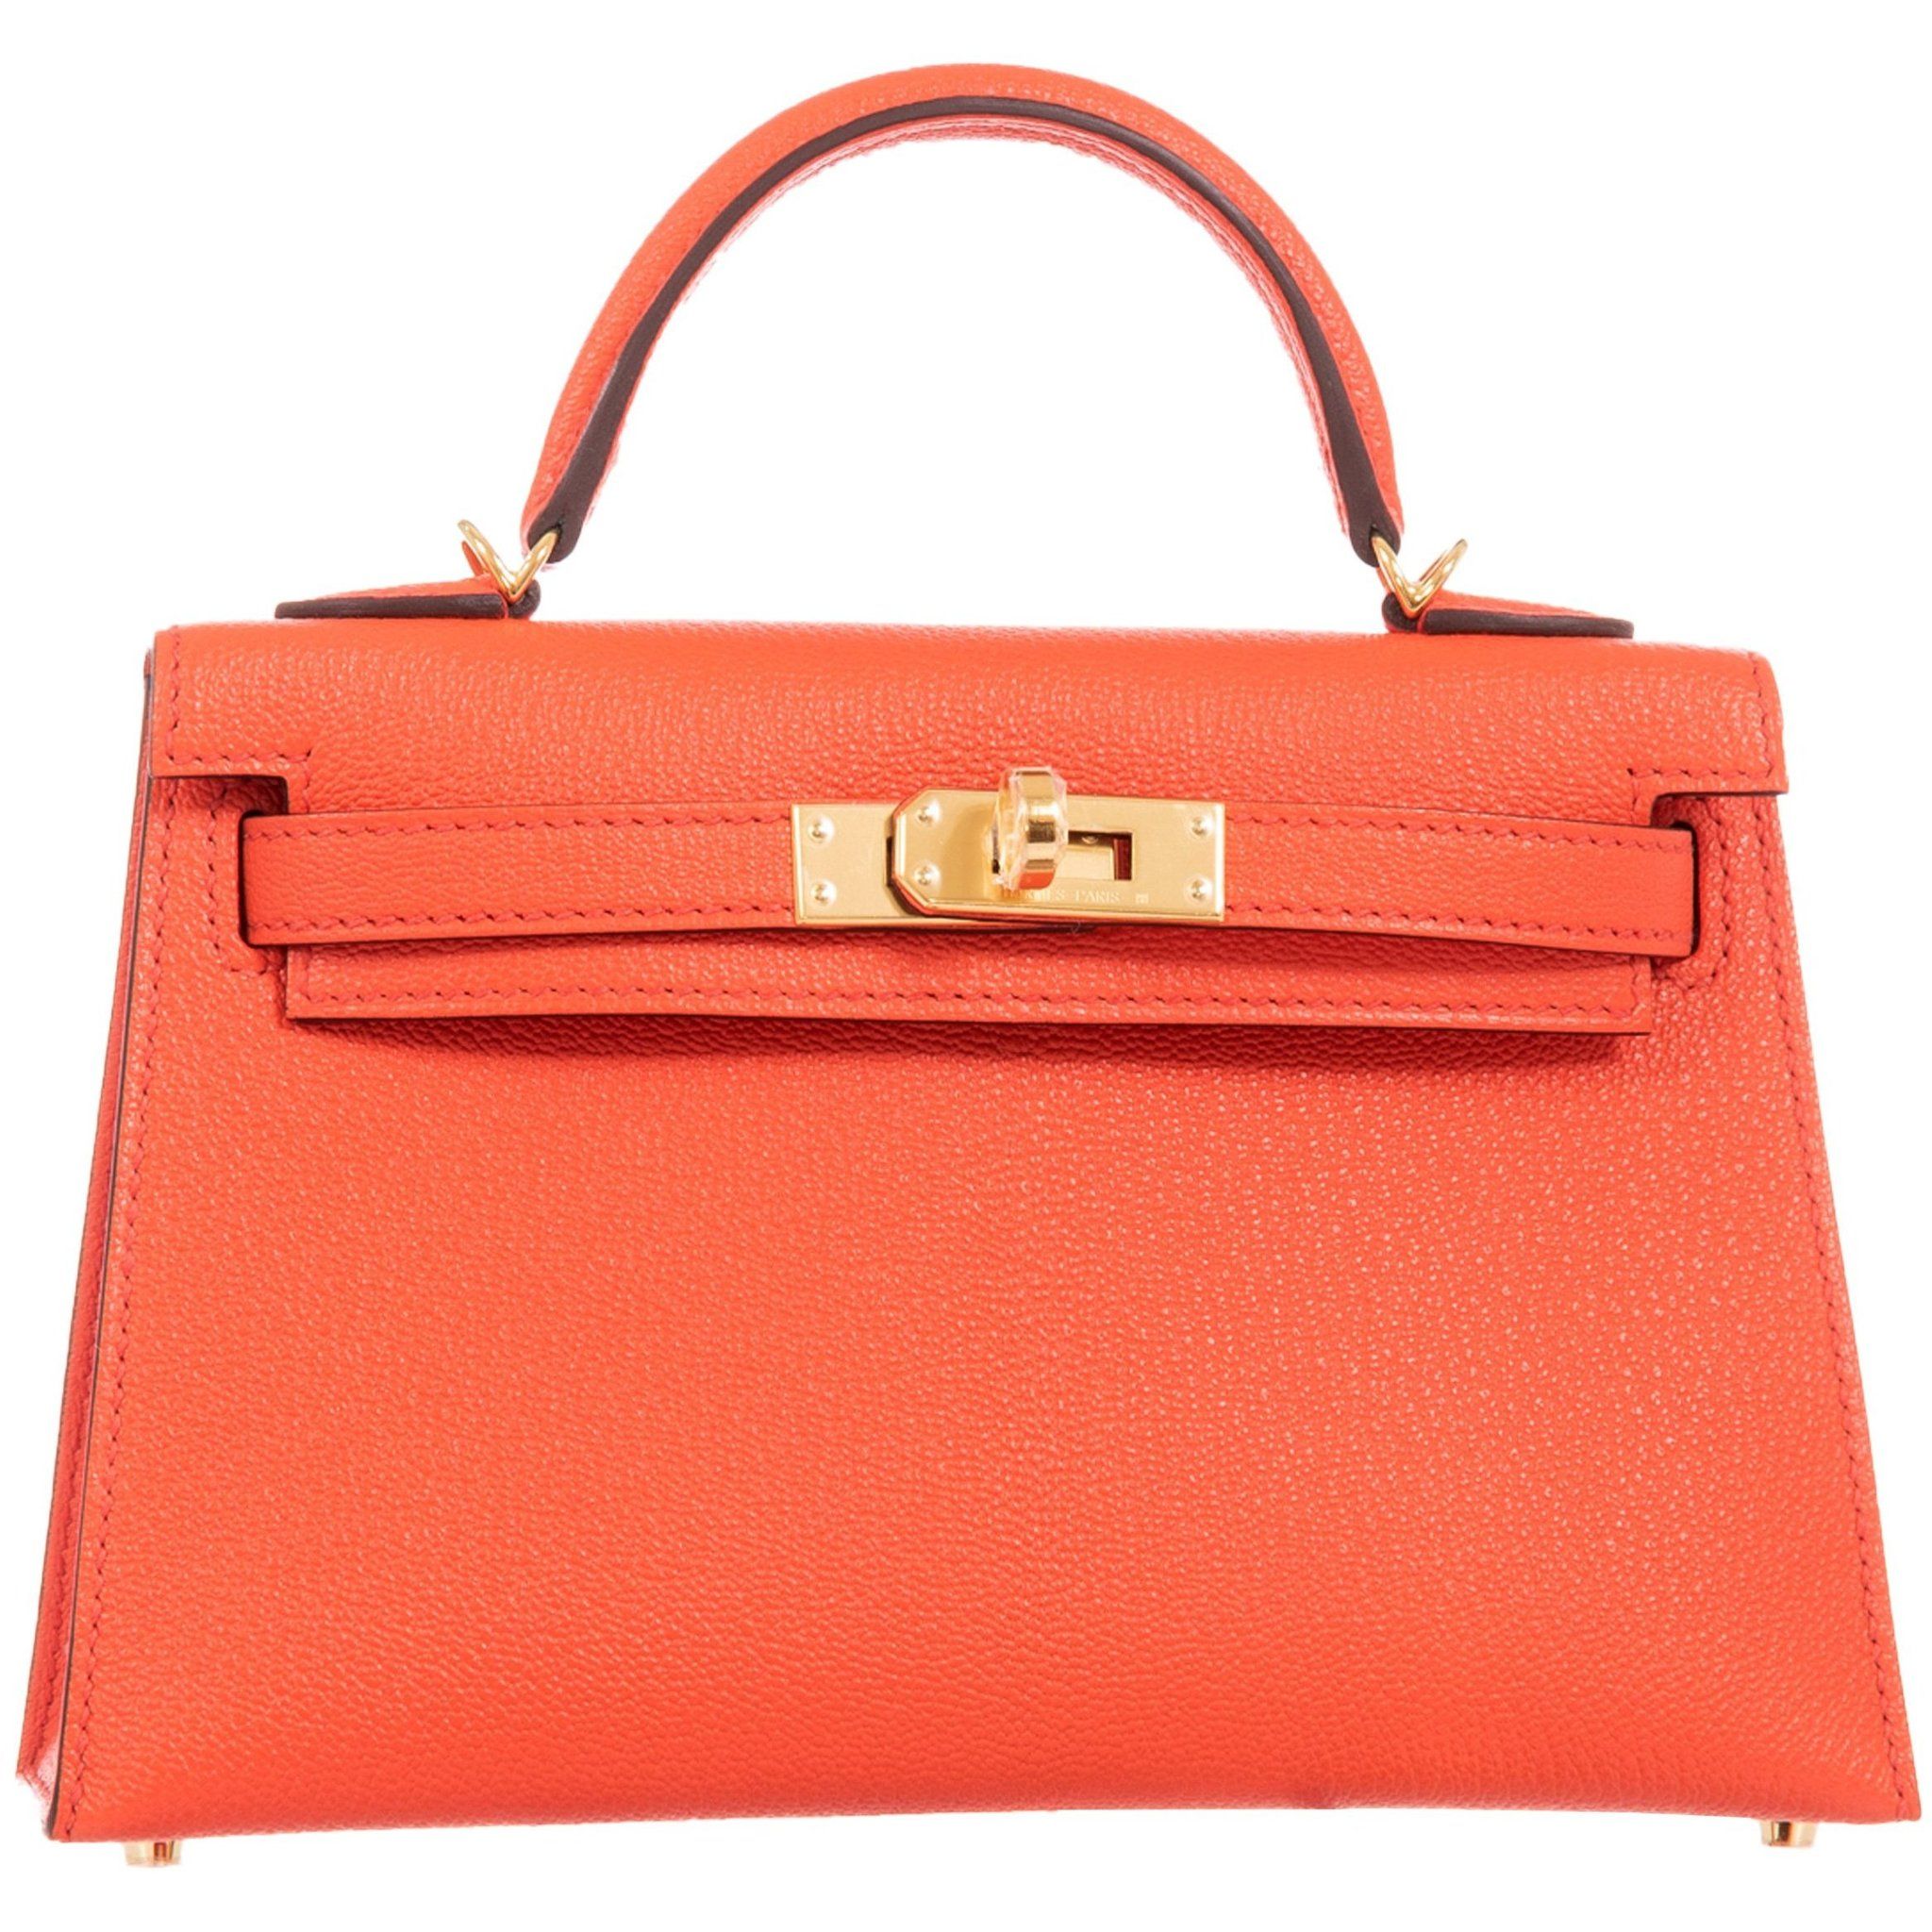 price of a hermes kelly